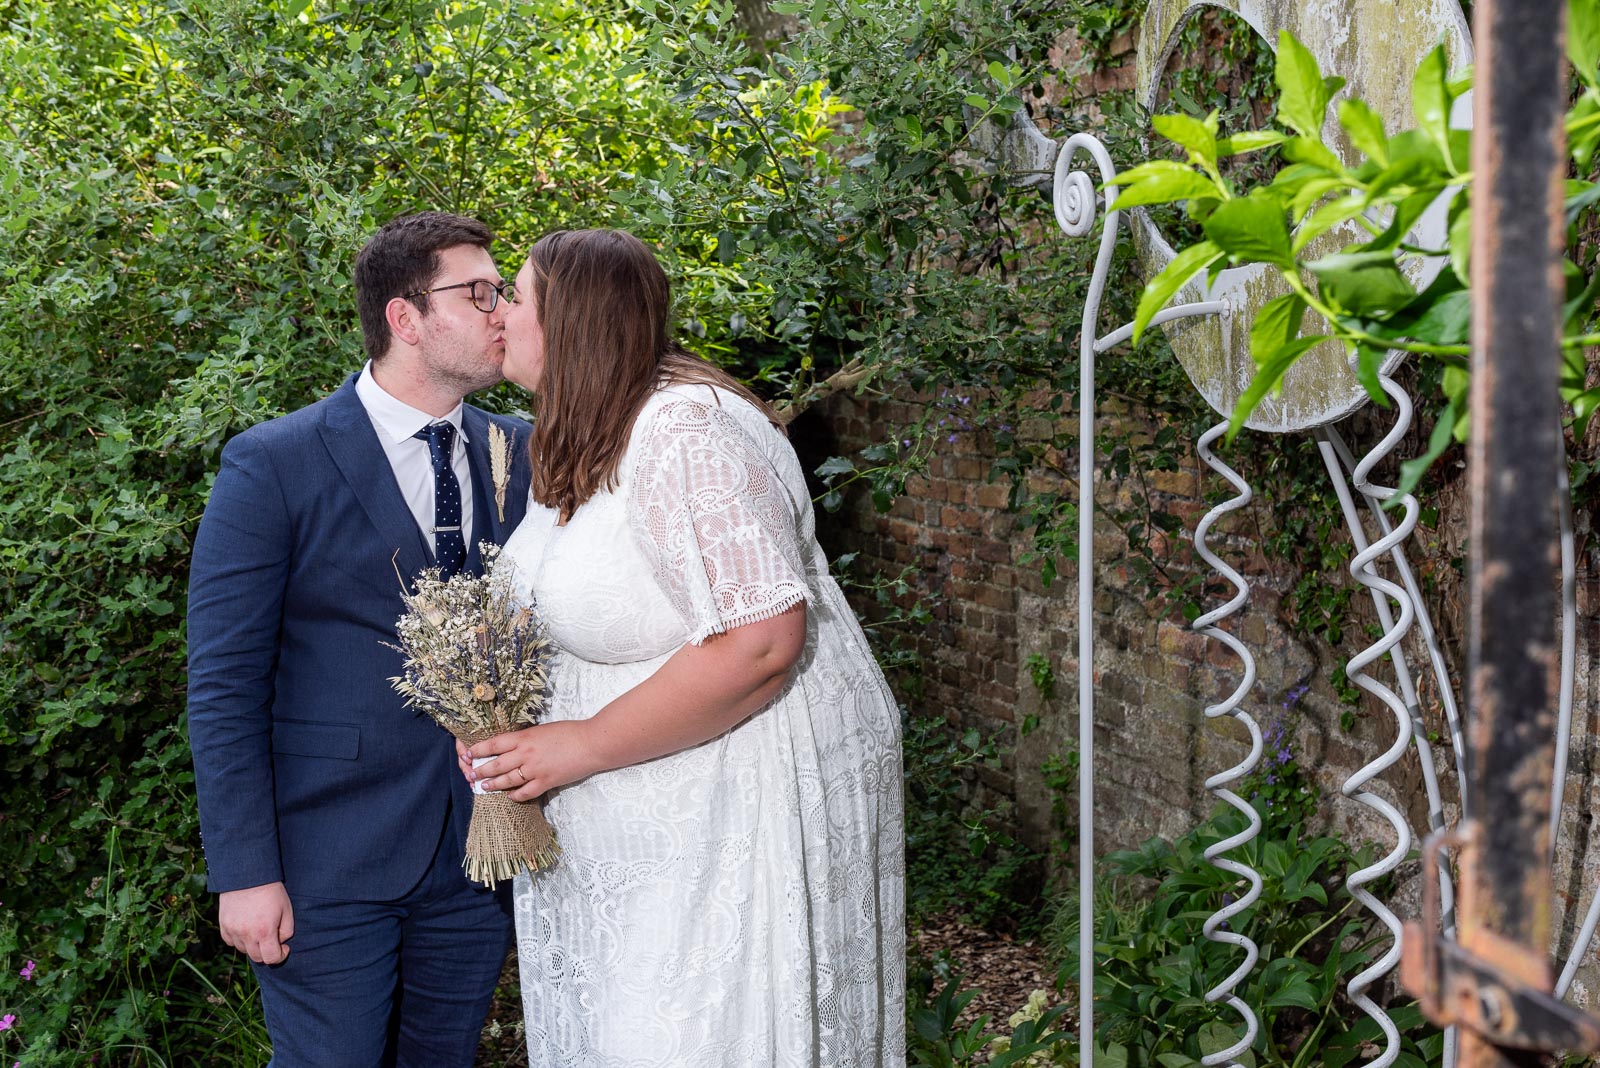 Sophie and Nathan embrace in the secret garden in Southover Grange after their wedding in Lewes Register Office.